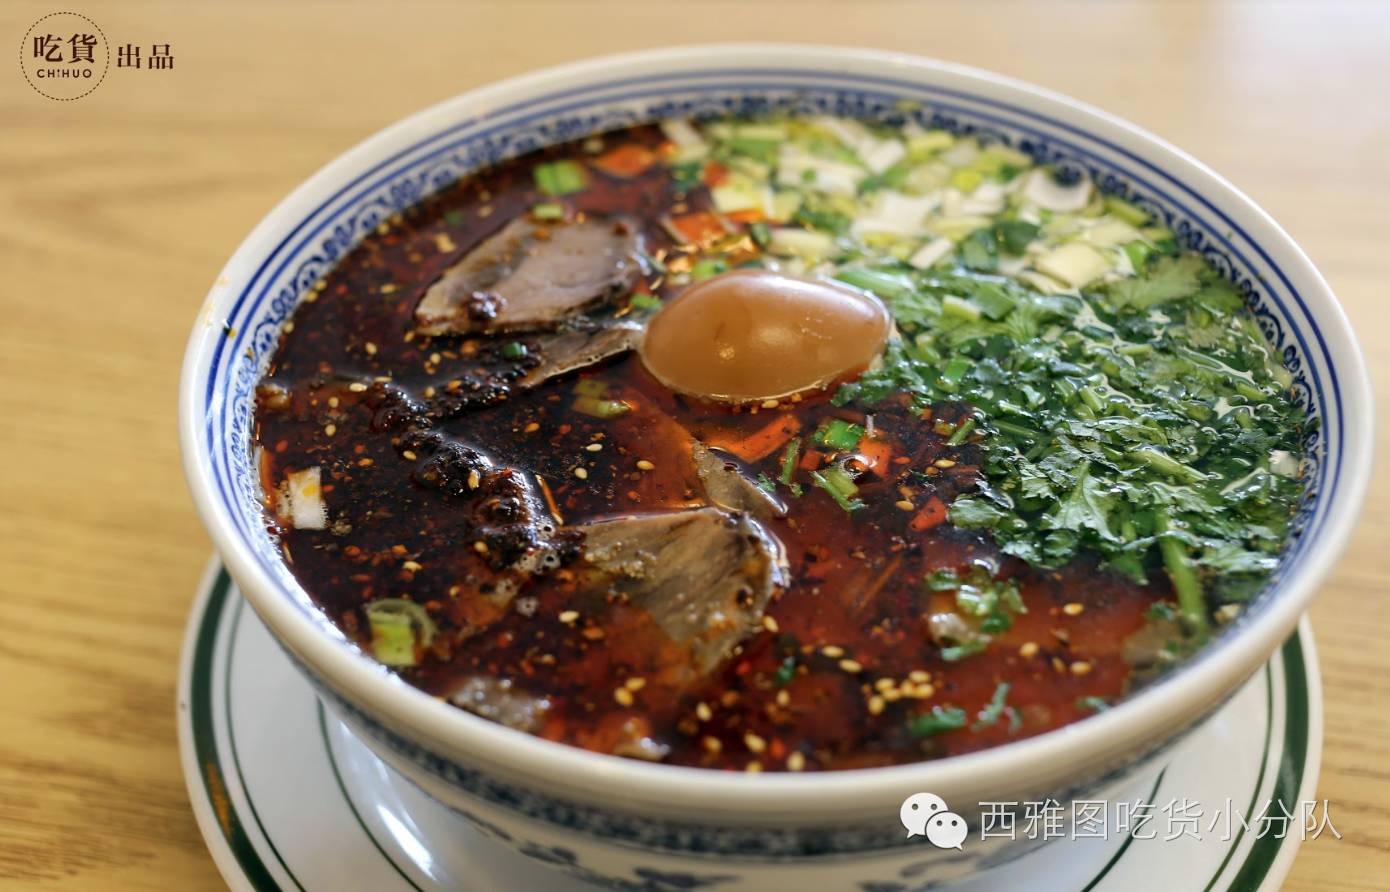 Come to Lanzhou Ramen to send spicy beef, the best energy supply for outlet shopping!